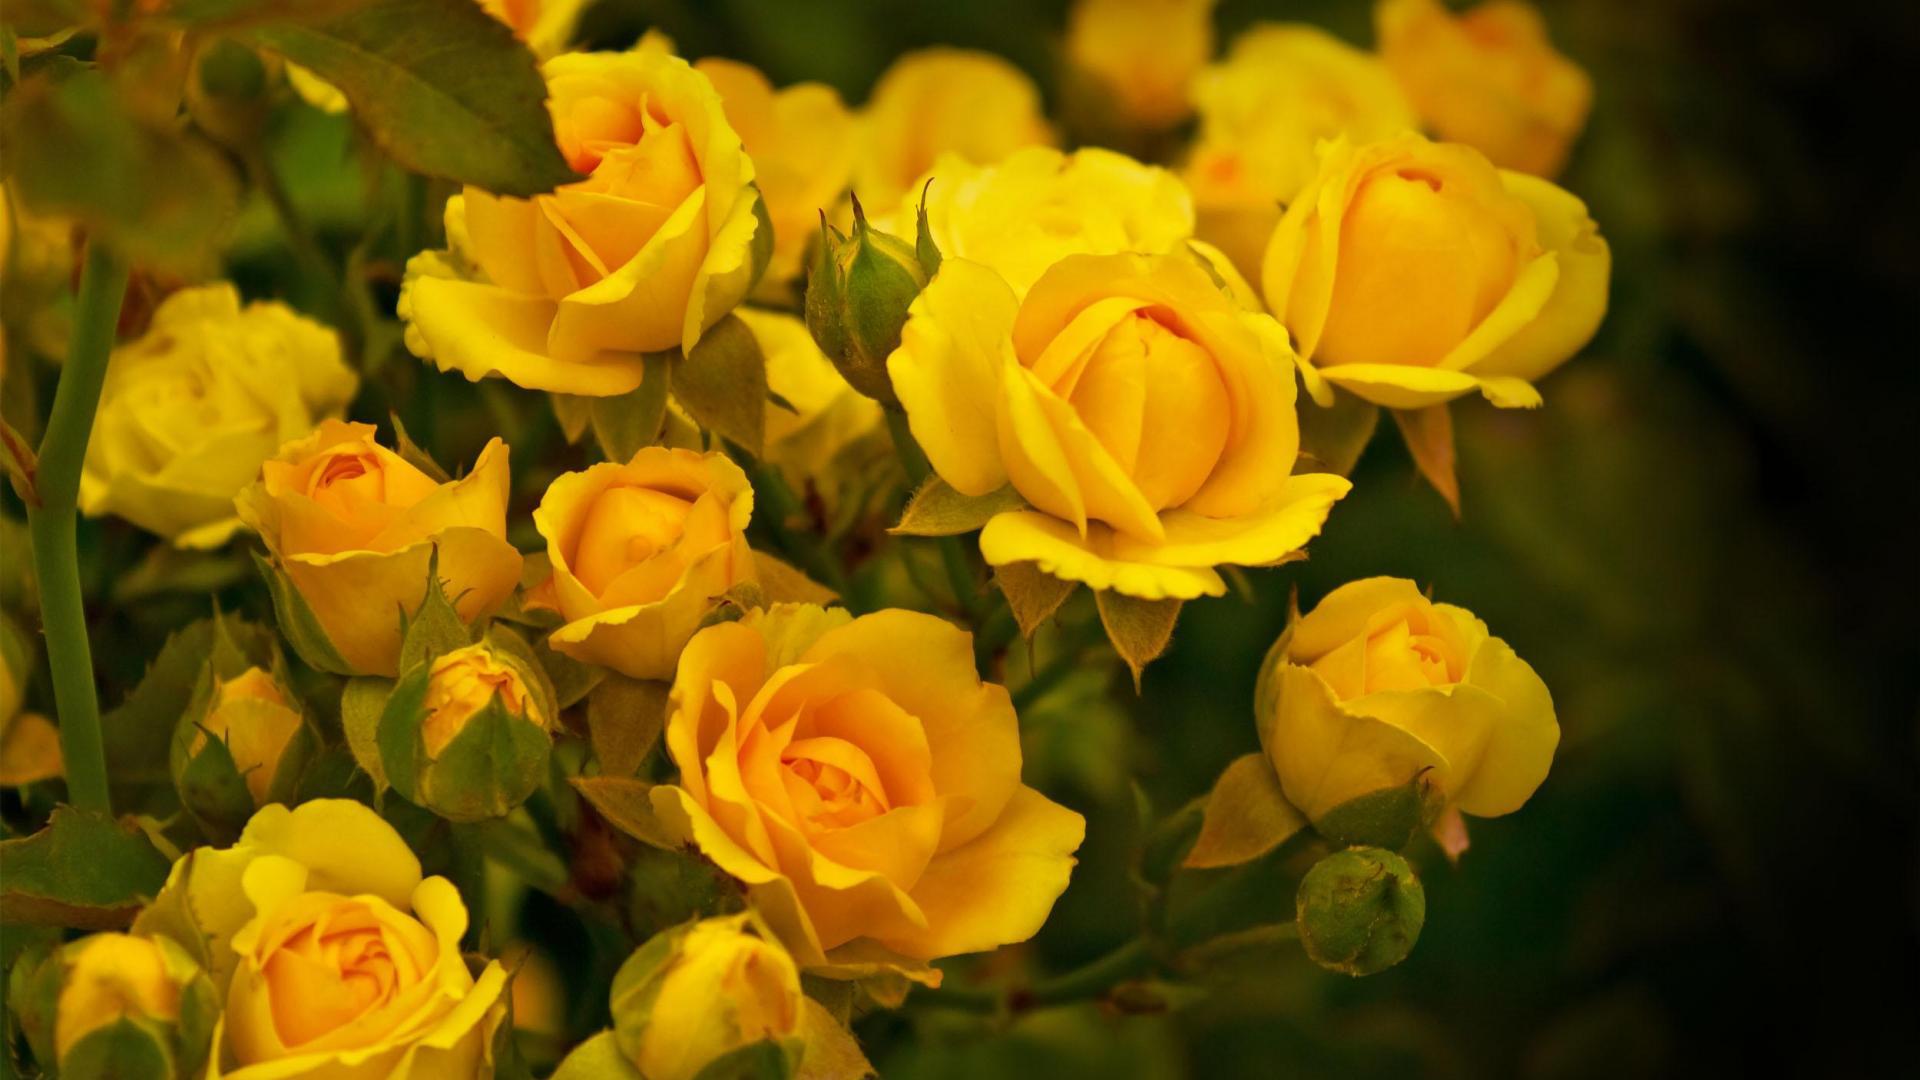 Beautiful yellow roses in the garden wallpapers and images - wallpapers